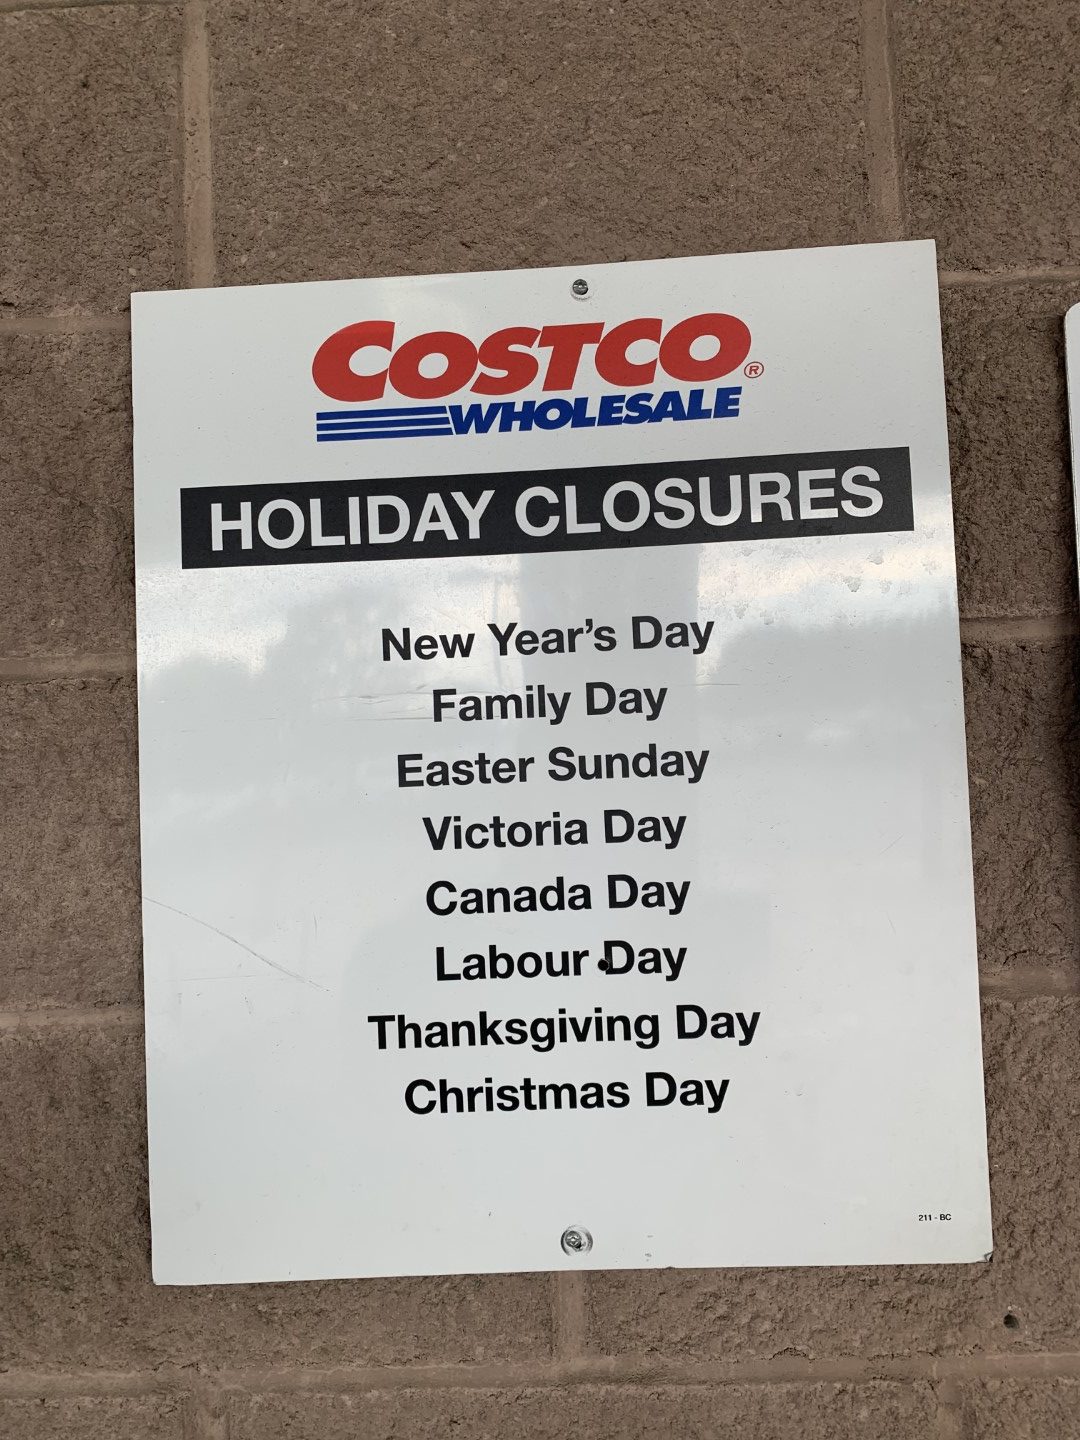 Costco Last Minute Back to School! Apple Ipads & Watches, Stationary